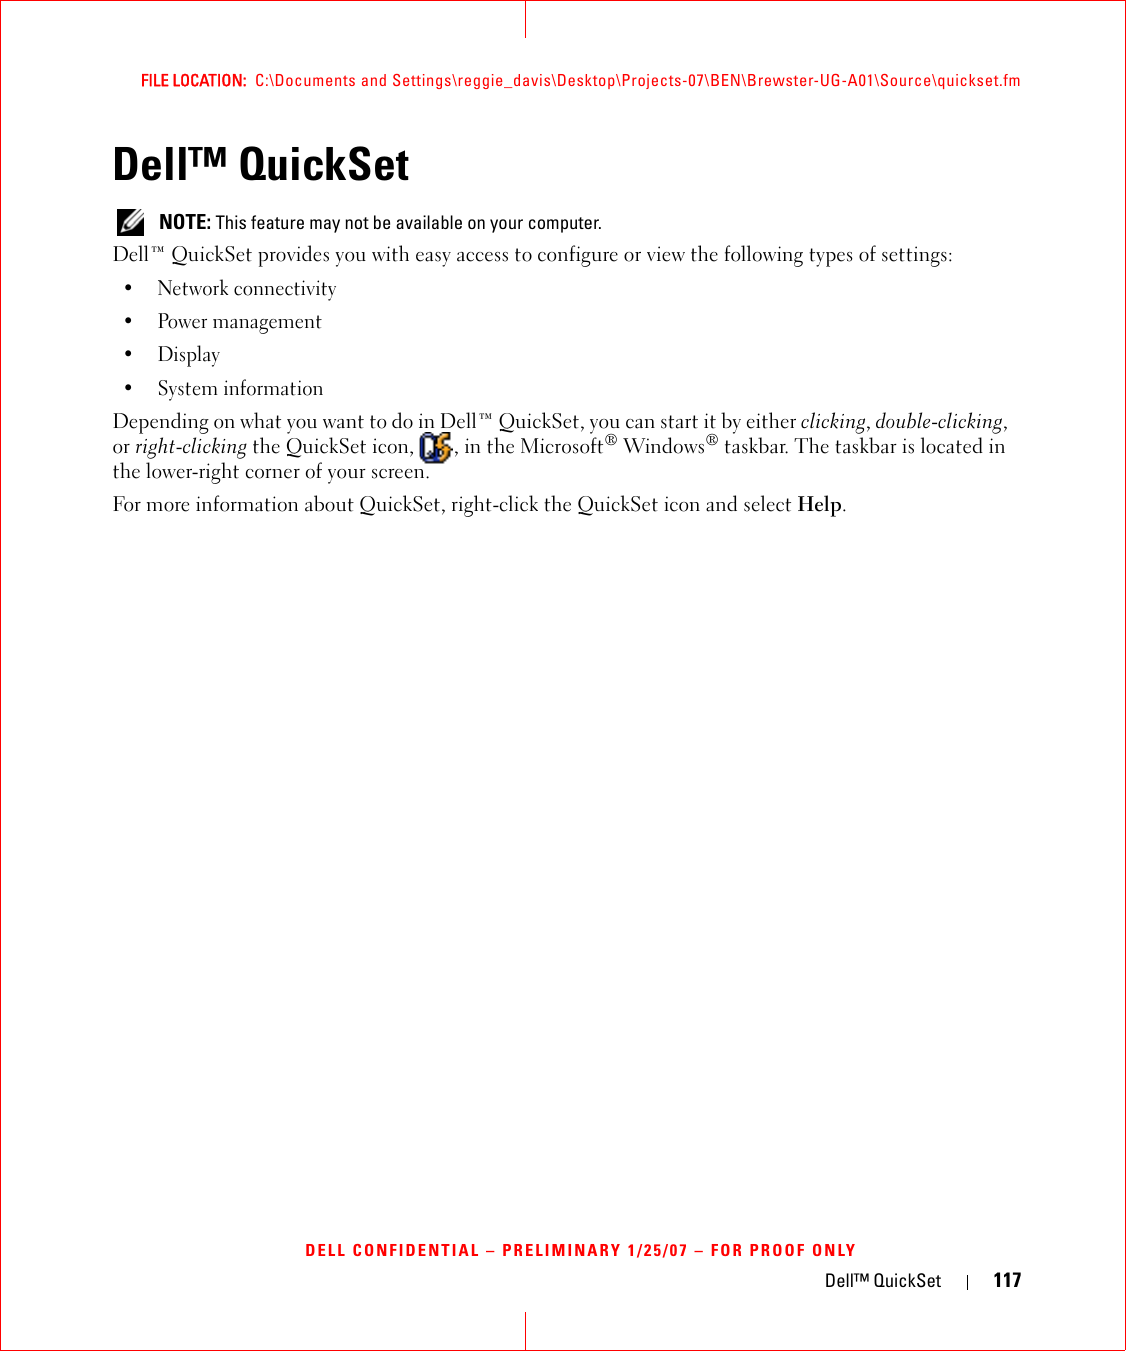 Dell™ QuickSet 117FILE LOCATION:  C:\Documents and Settings\reggie_davis\Desktop\Projects-07\BEN\Brewster-UG-A01\Source\quickset.fmDELL CONFIDENTIAL – PRELIMINARY 1/25/07 – FOR PROOF ONLYDell™ QuickSet NOTE: This feature may not be available on your computer.Dell™ QuickSet provides you with easy access to configure or view the following types of settings:• Network connectivity• Power management•Display• System informationDepending on what you want to do in Dell™ QuickSet, you can start it by either clicking, double-clicking, or right-clicking the QuickSet icon,  , in the Microsoft® Windows® taskbar. The taskbar is located in the lower-right corner of your screen.For more information about QuickSet, right-click the QuickSet icon and select Help.